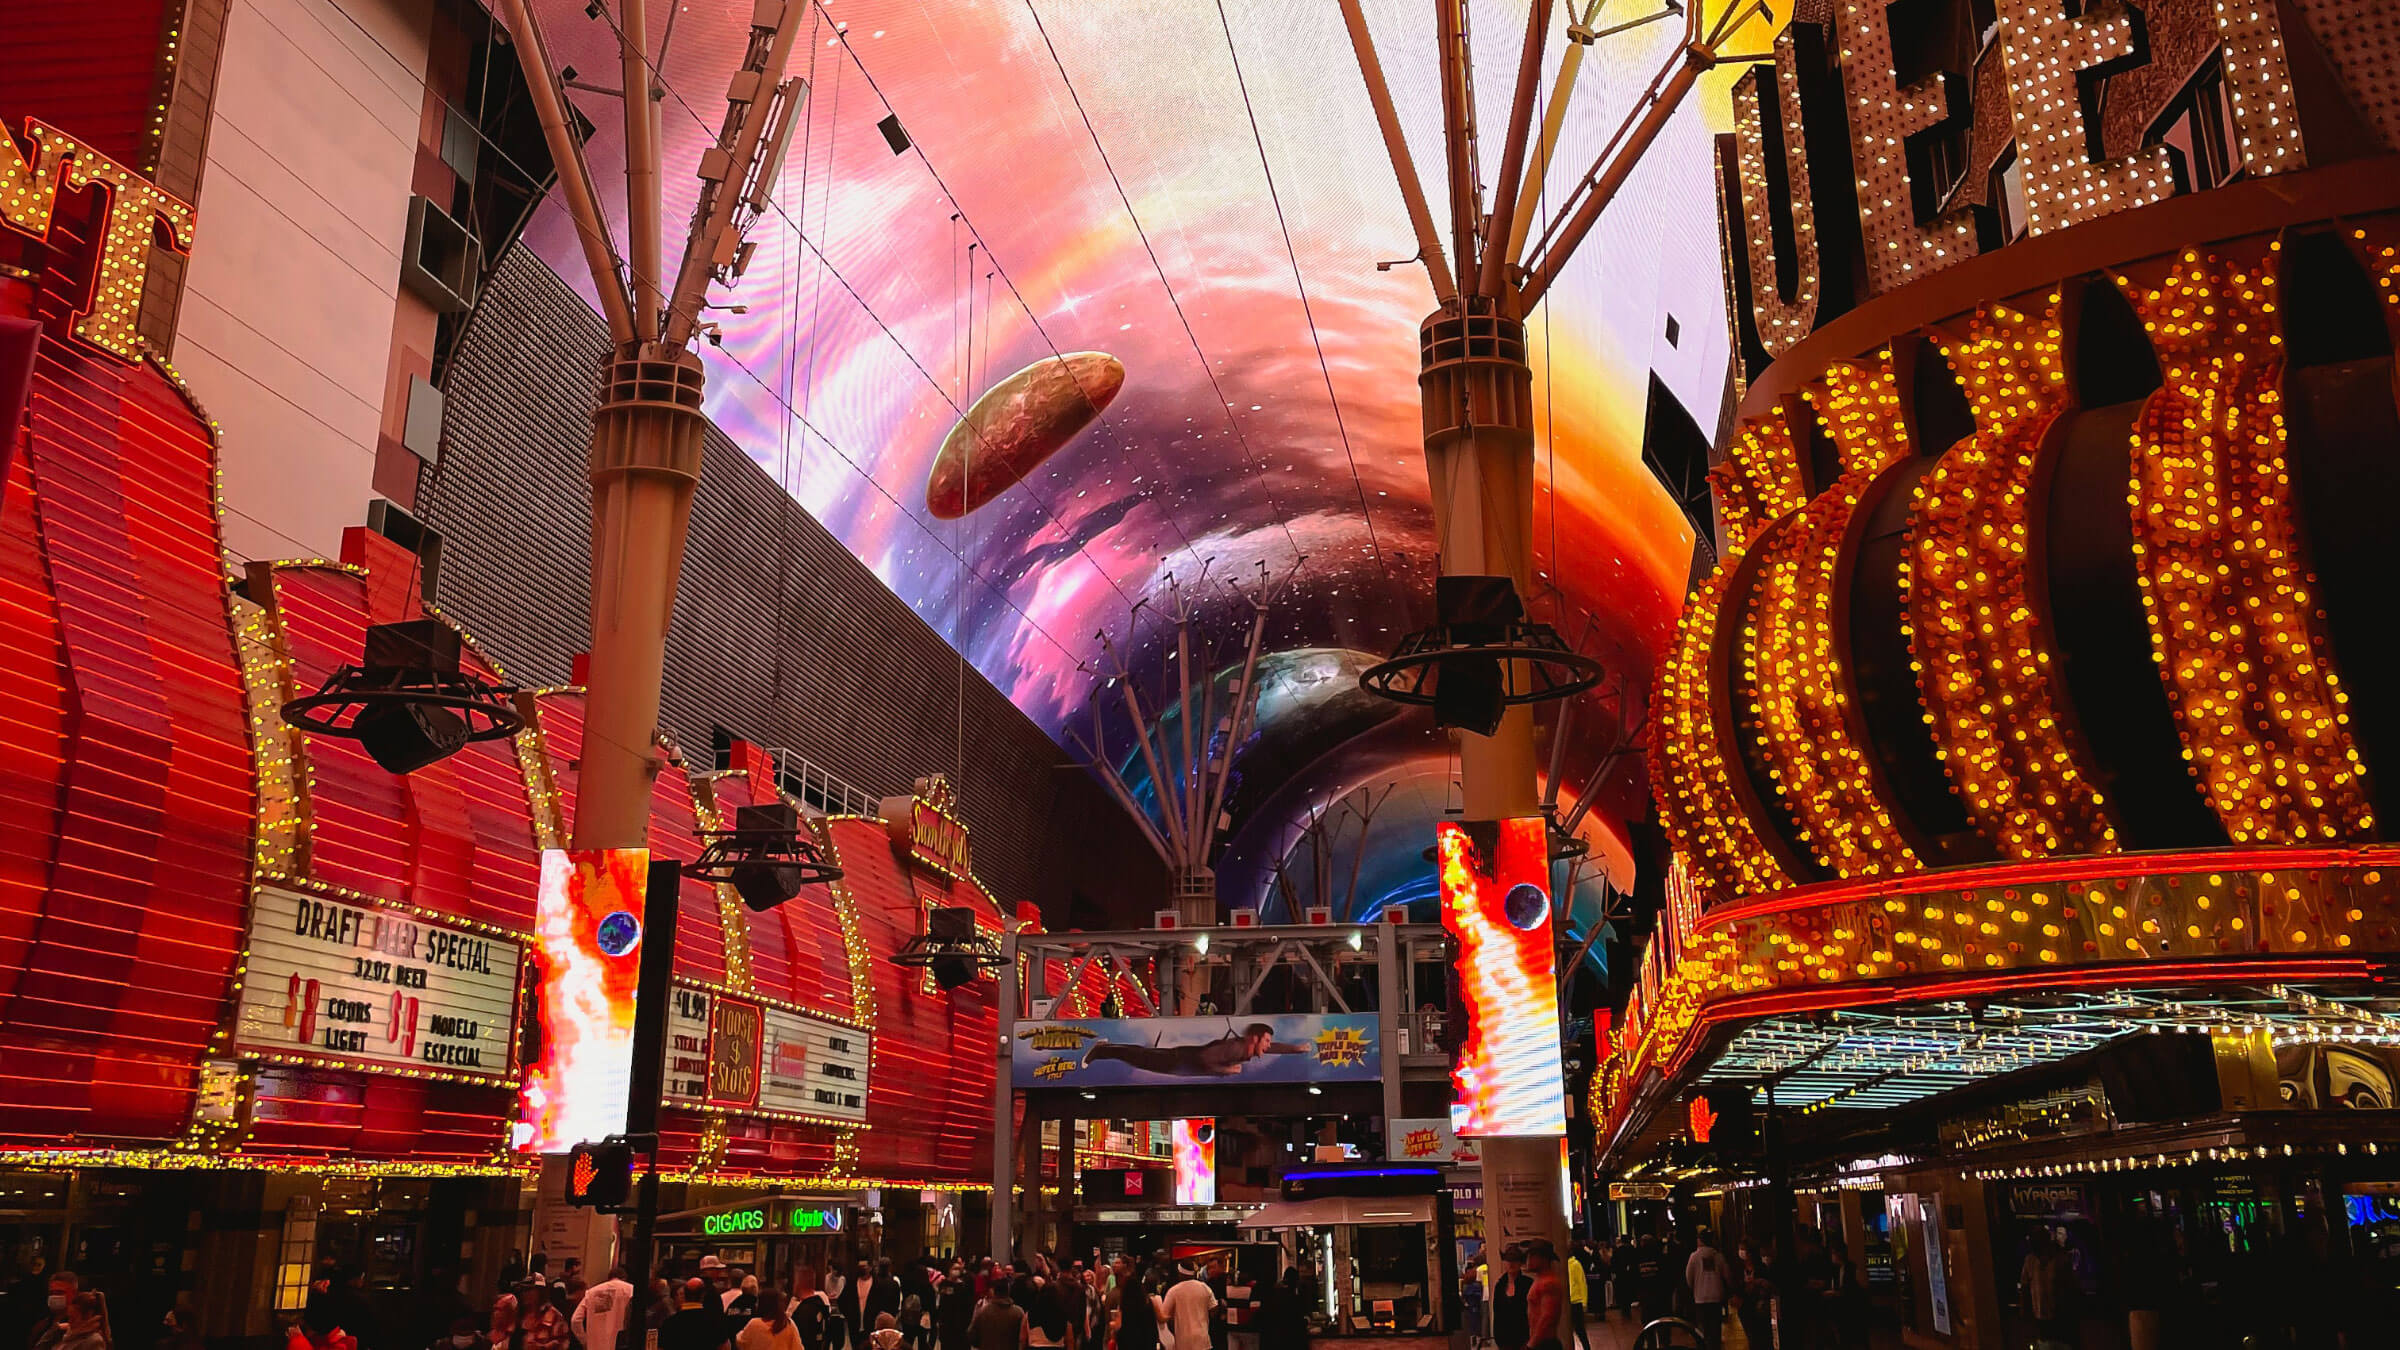 Fremont Street Experience overhead screen at night